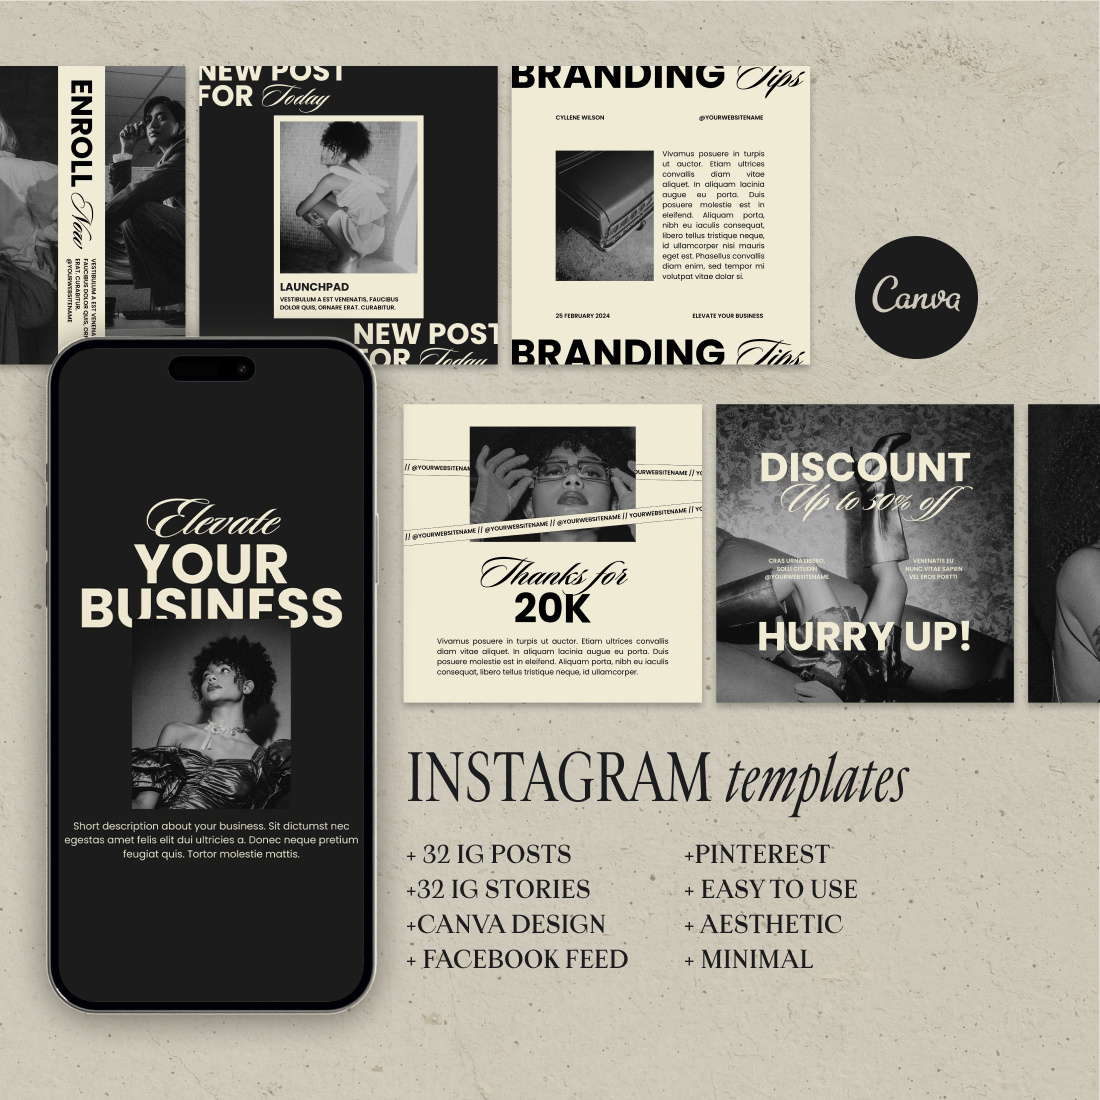 Canva Instagram Templates For Business Coaches And Course Creators cover image.